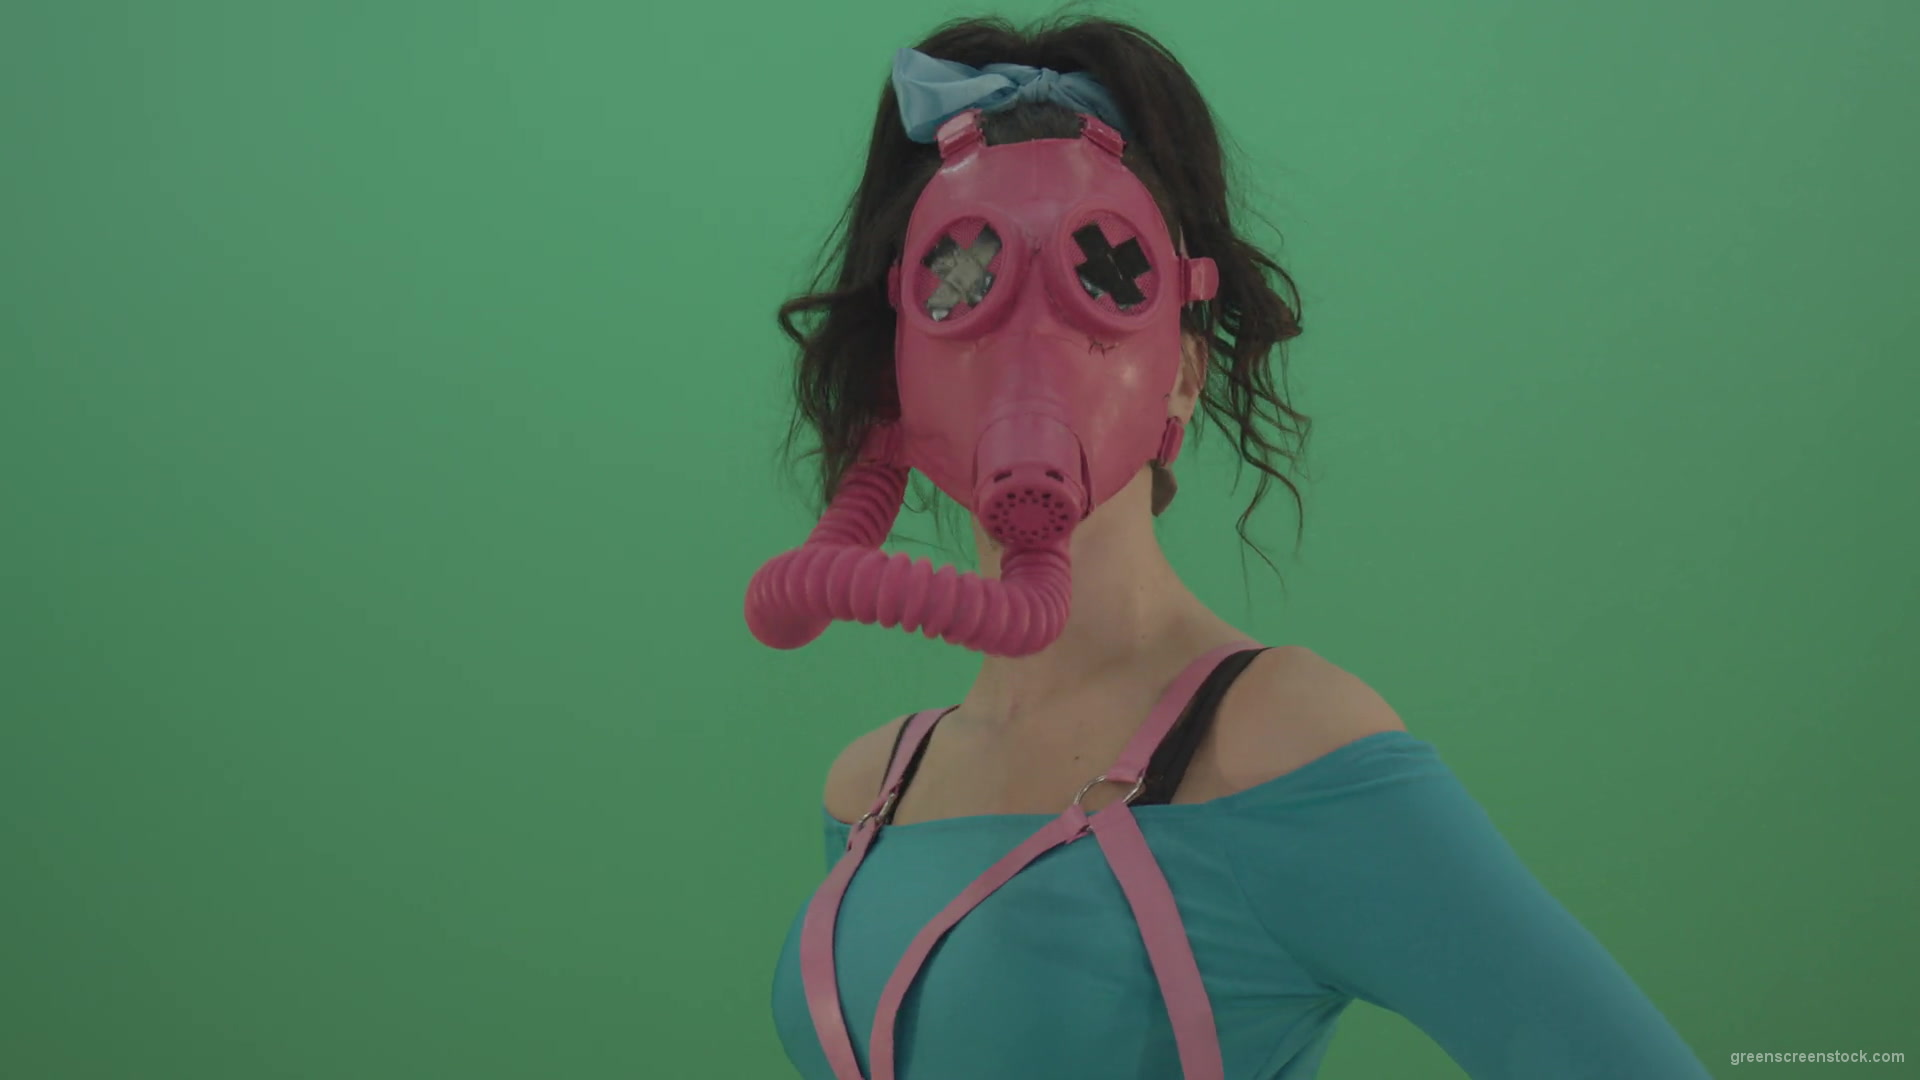 Pink-head-in-Gas-Mask-moving-Go-Go-Dance-isolated-on-green-screen-4K-Video-Footage-1920_007 Green Screen Stock